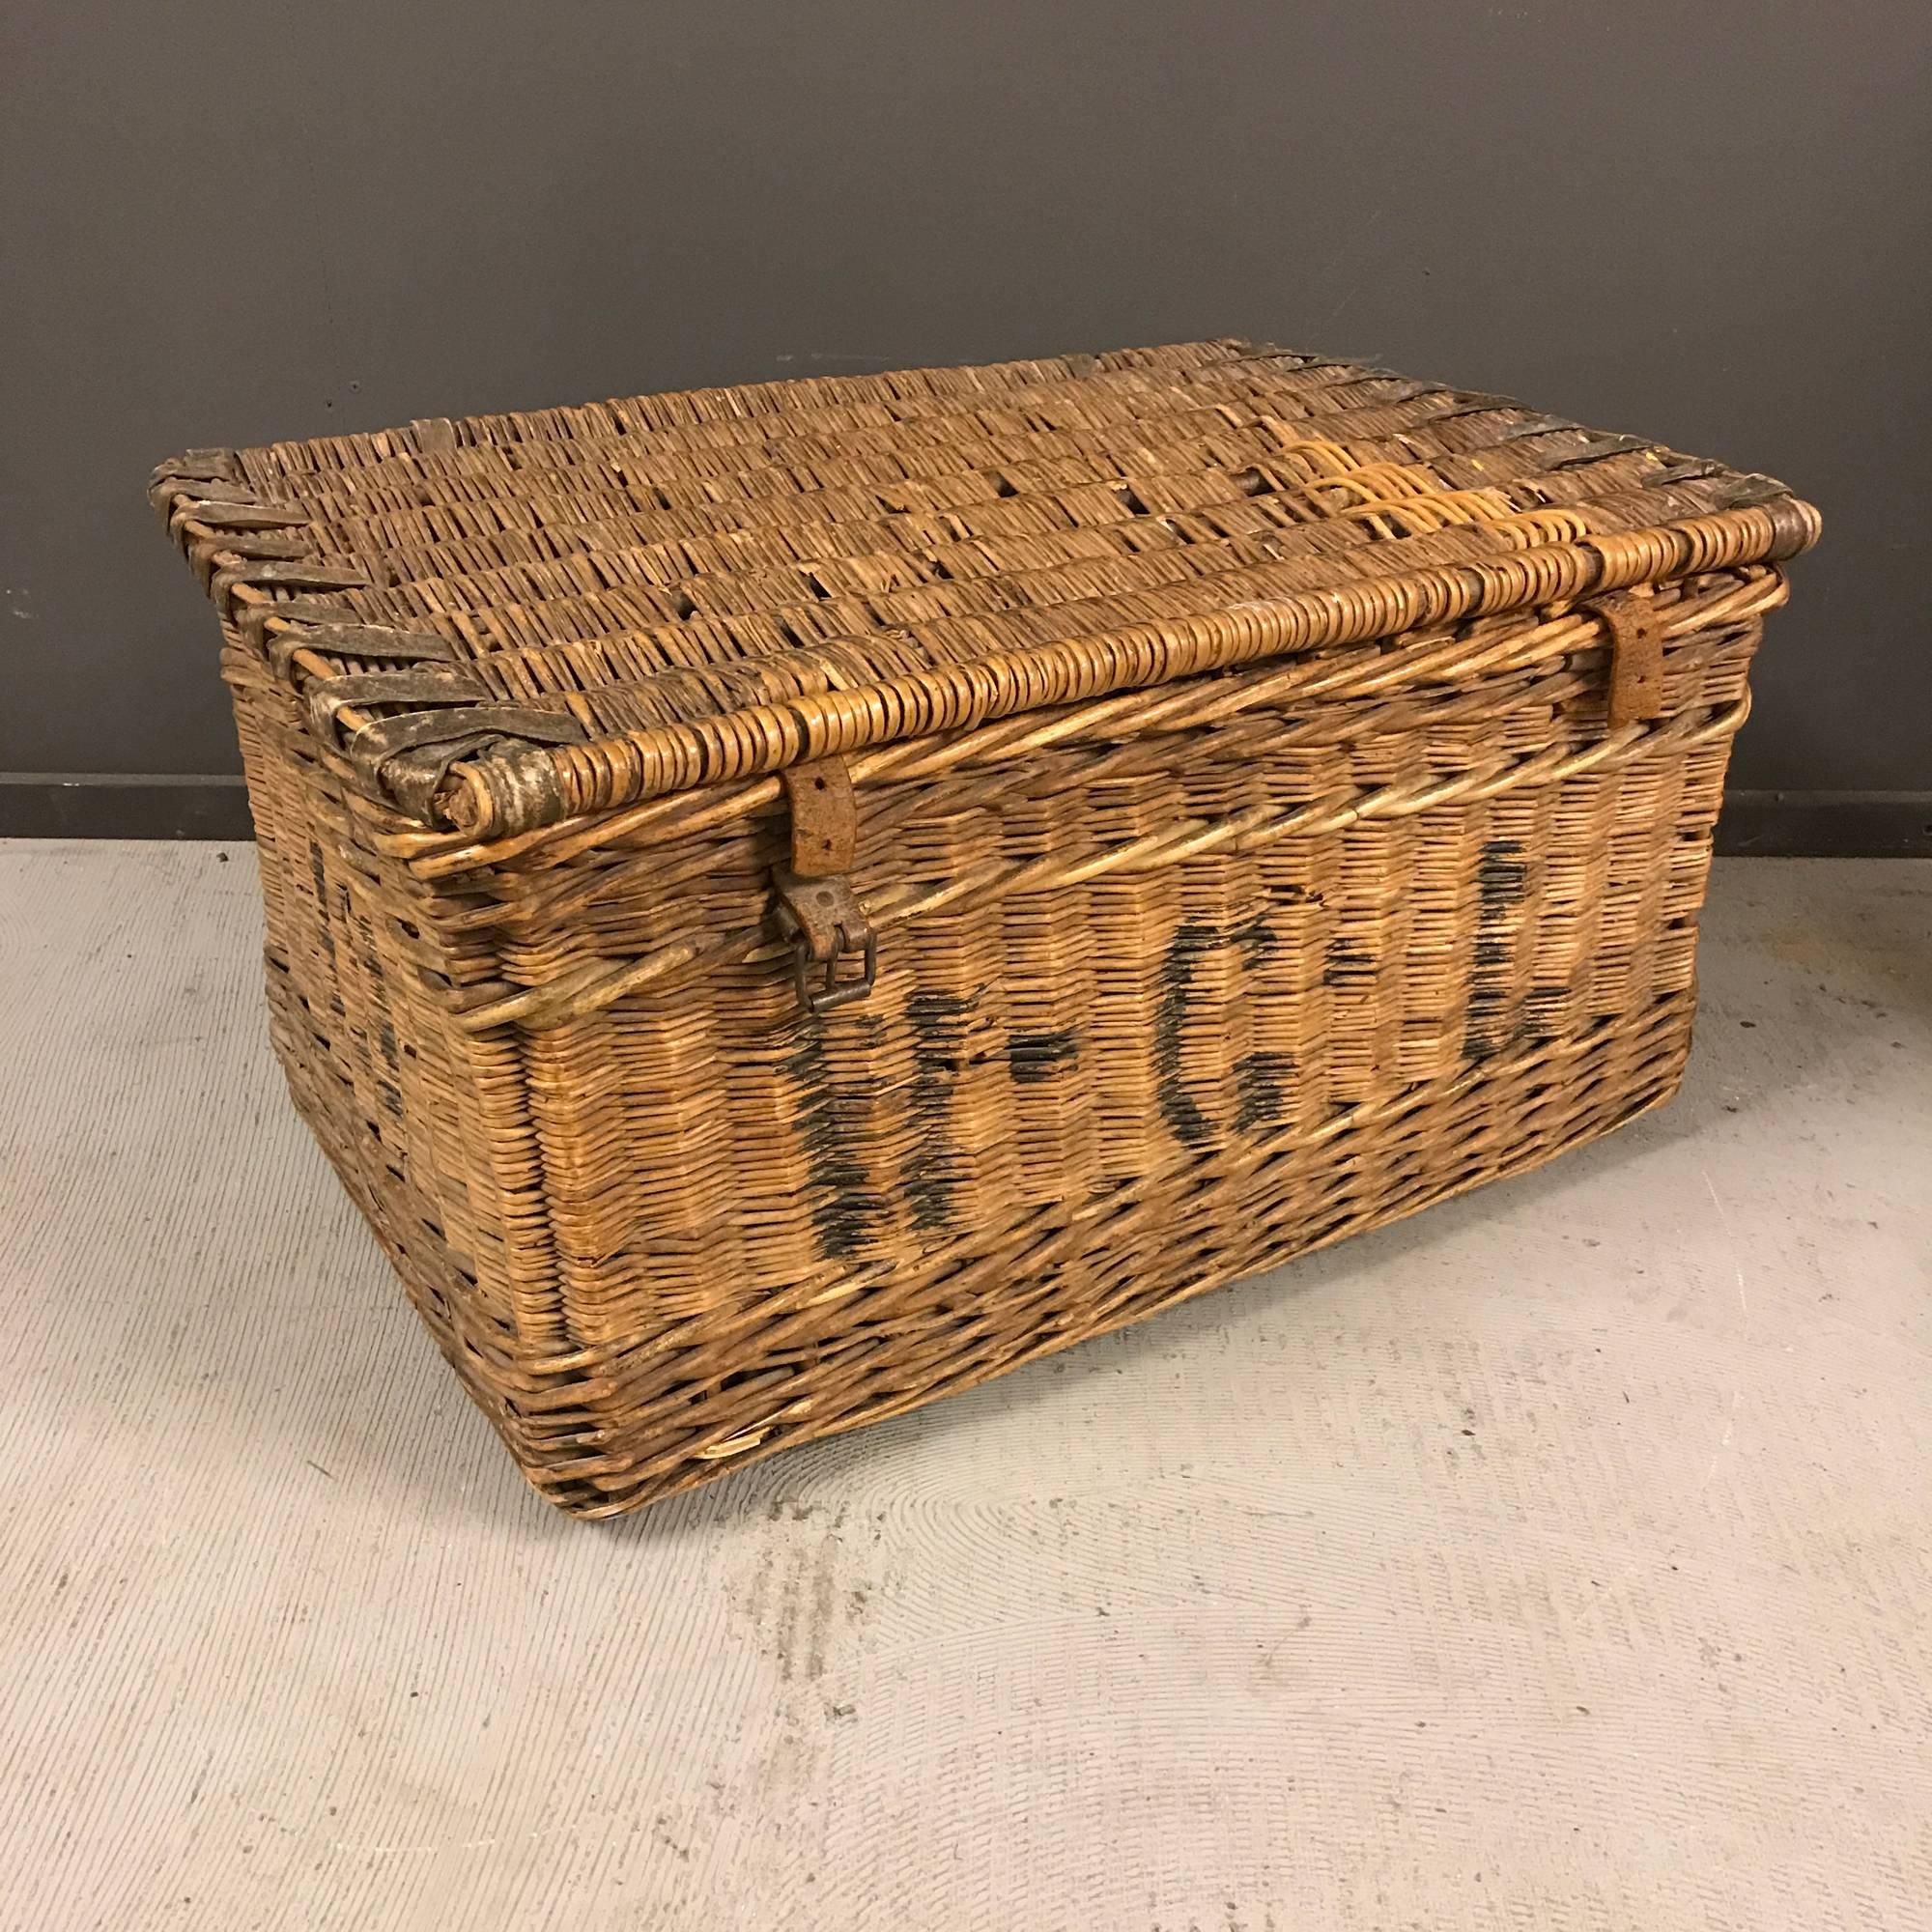 Wicker basket with leather straps made in England during the early 20th century.